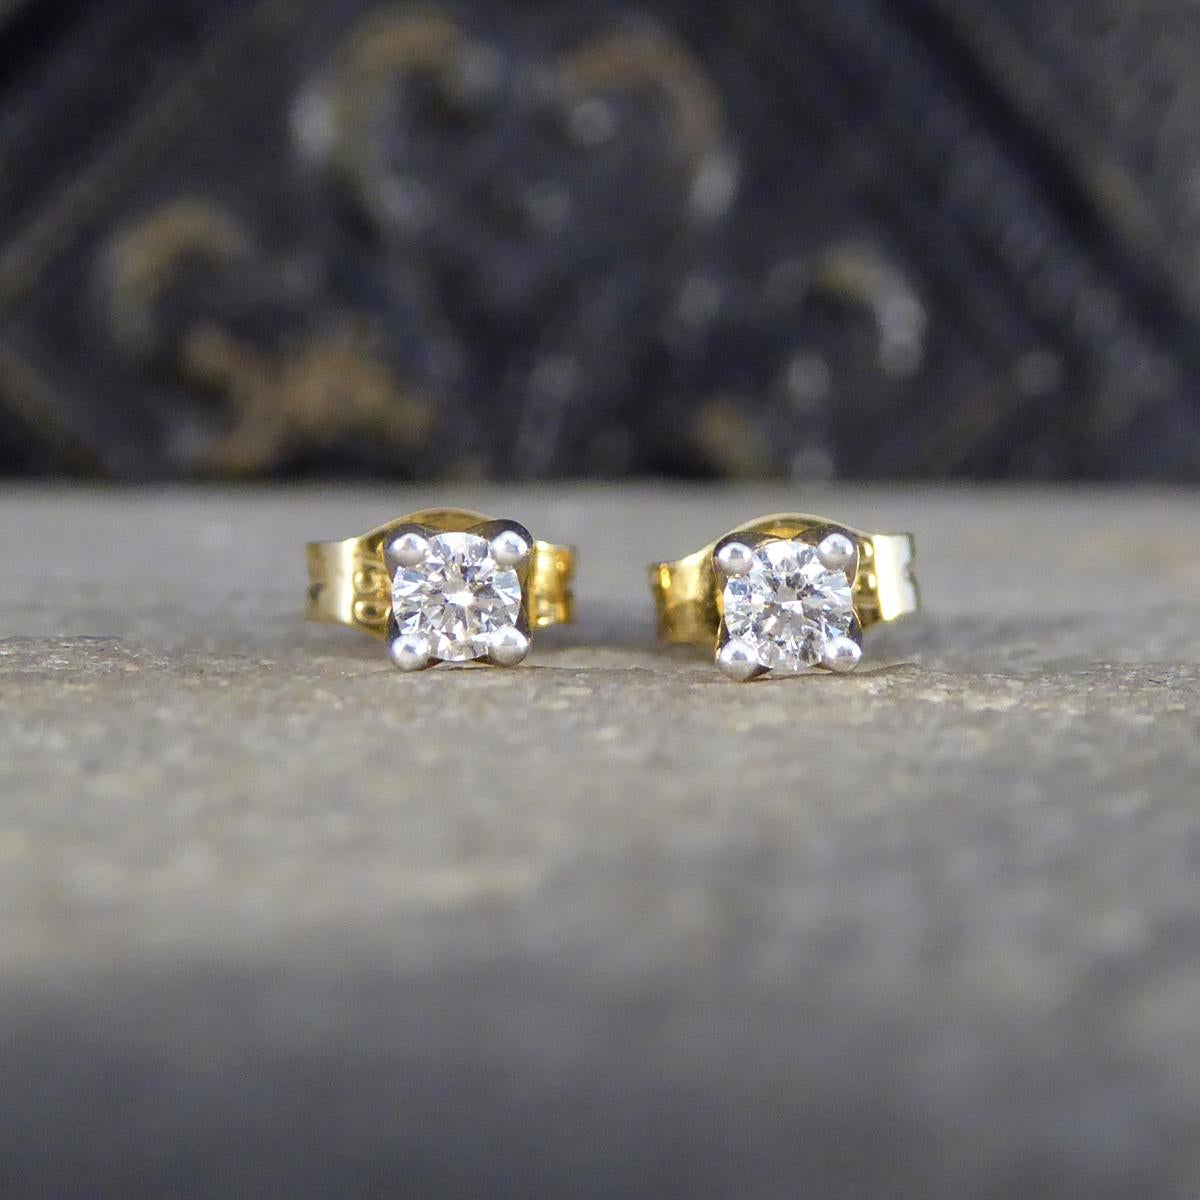 The perfect pair of stud earrings for everyday wear, for the main or second piercing. Each stud is set with a Round Brilliant Cut Diamond, matching well in colour and clarity and weighing a total of 0.15ct. Each Diamond sits in a 18ct Yellow Gold